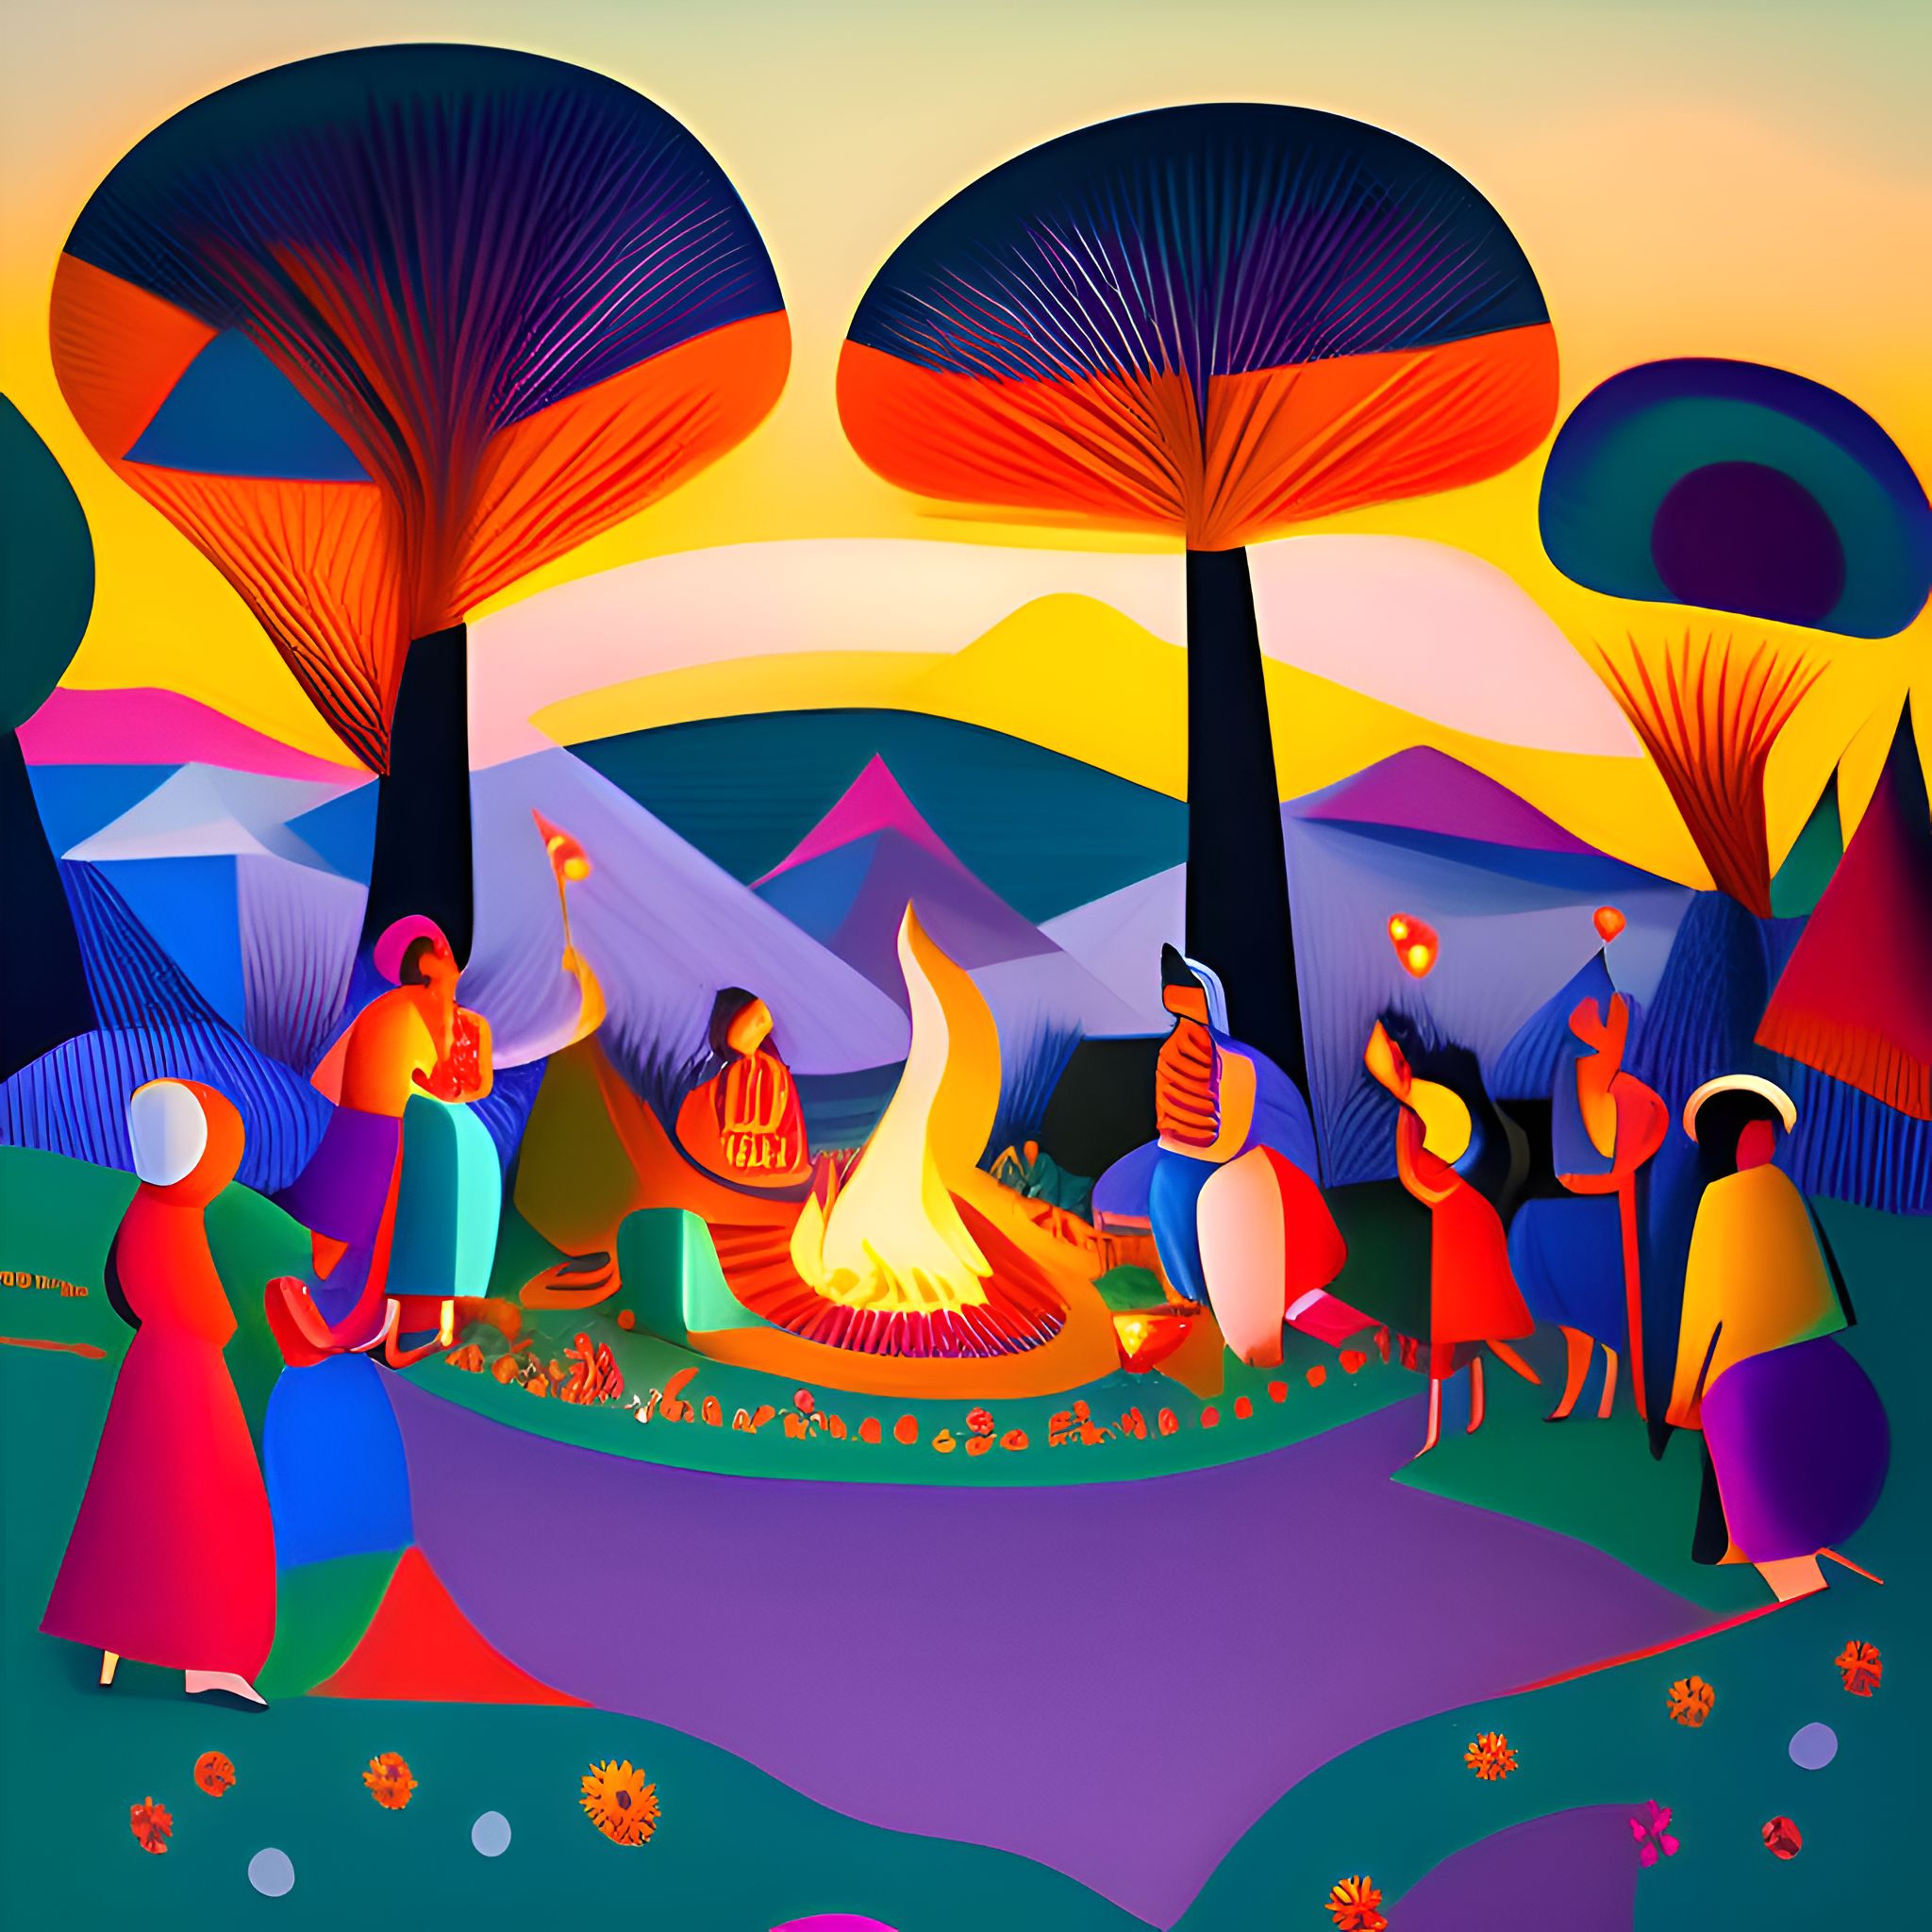 surrounded by joyful music and laughter, a warm, cozy bonfire illuminates their faces while towering douglas firs sway in the background, a strong sense of community is felt amongst them, creating a happy and peaceful atmosphere, a snack table nearby overflows with burritos, bright vegetables, and chips, tempting them to take a break from dancing., 2d vector illustration, dancing on the beach. music and laughter fills the air. joyful bonfire. the trees look like douglas firs. there is a strong sense of community. happy and peaceful. there is a snack table with burritos and bright vegetables and chips., digital lavender, luscious red, pablo picasso style